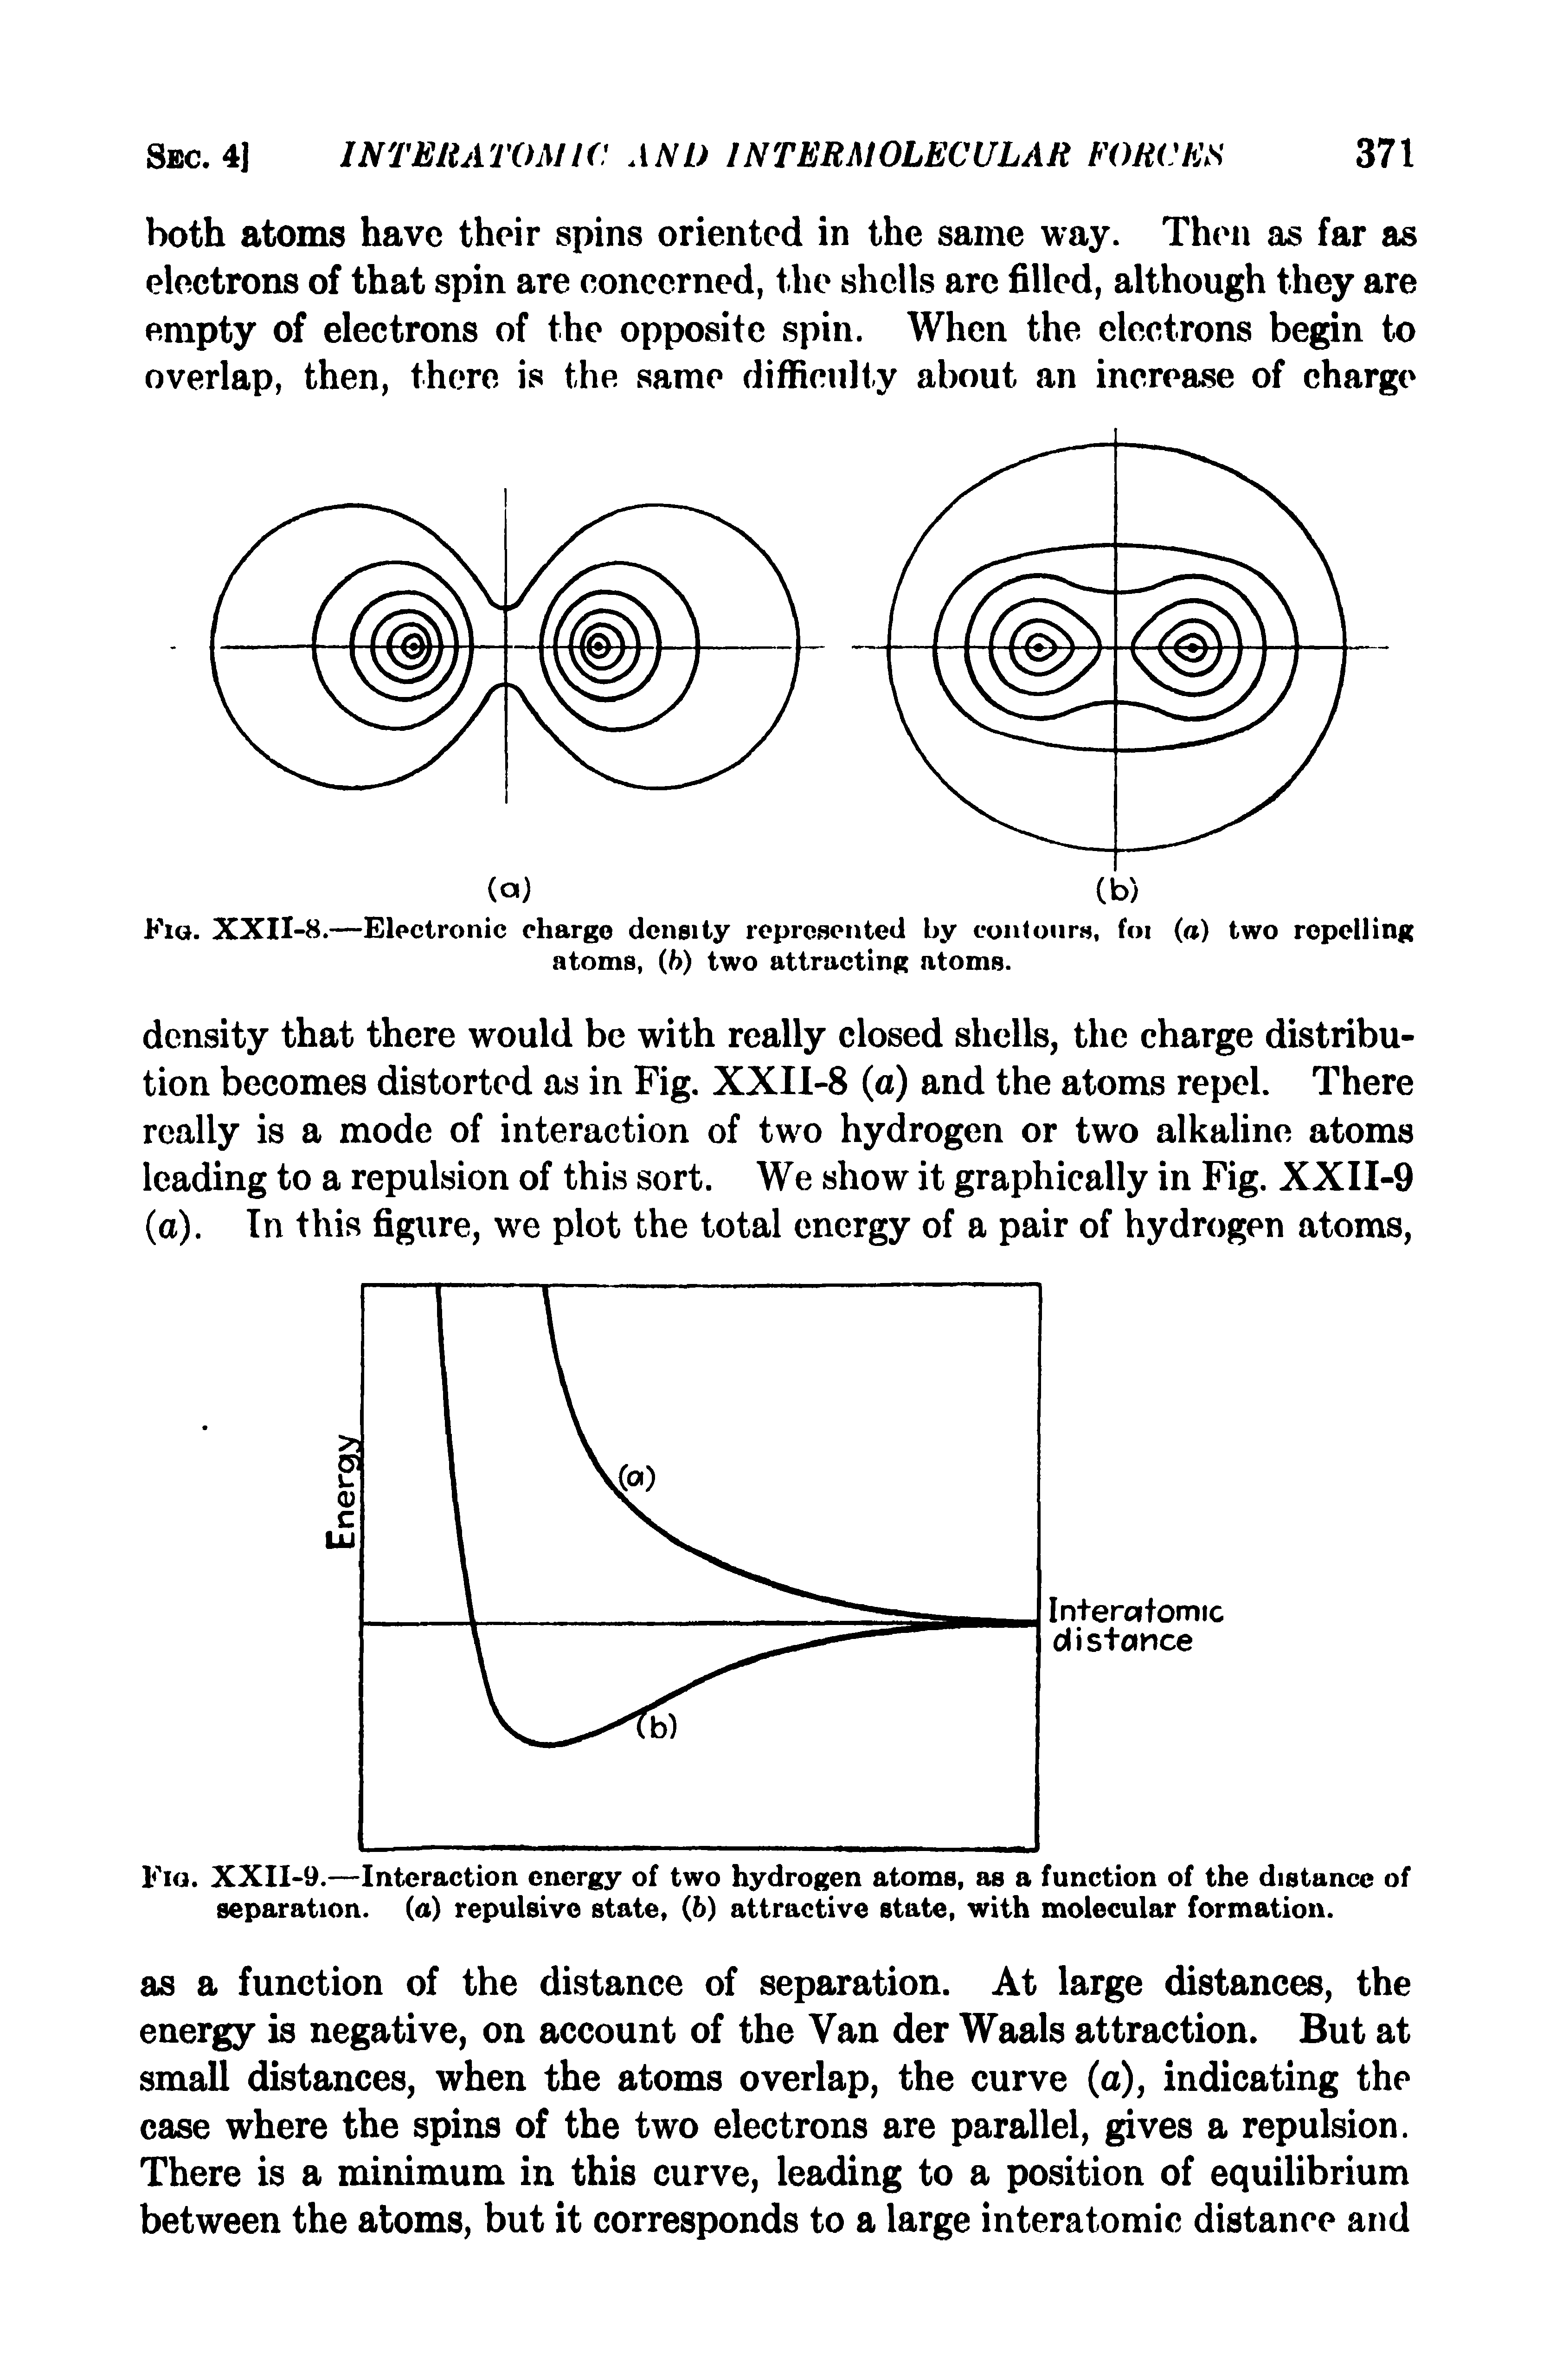 Fig. XXII-9.—Interaction energy of two hydrogen atoms, as a function of the distance of separation, (a) repulsive state, (6) attractive state, with molecular formation.